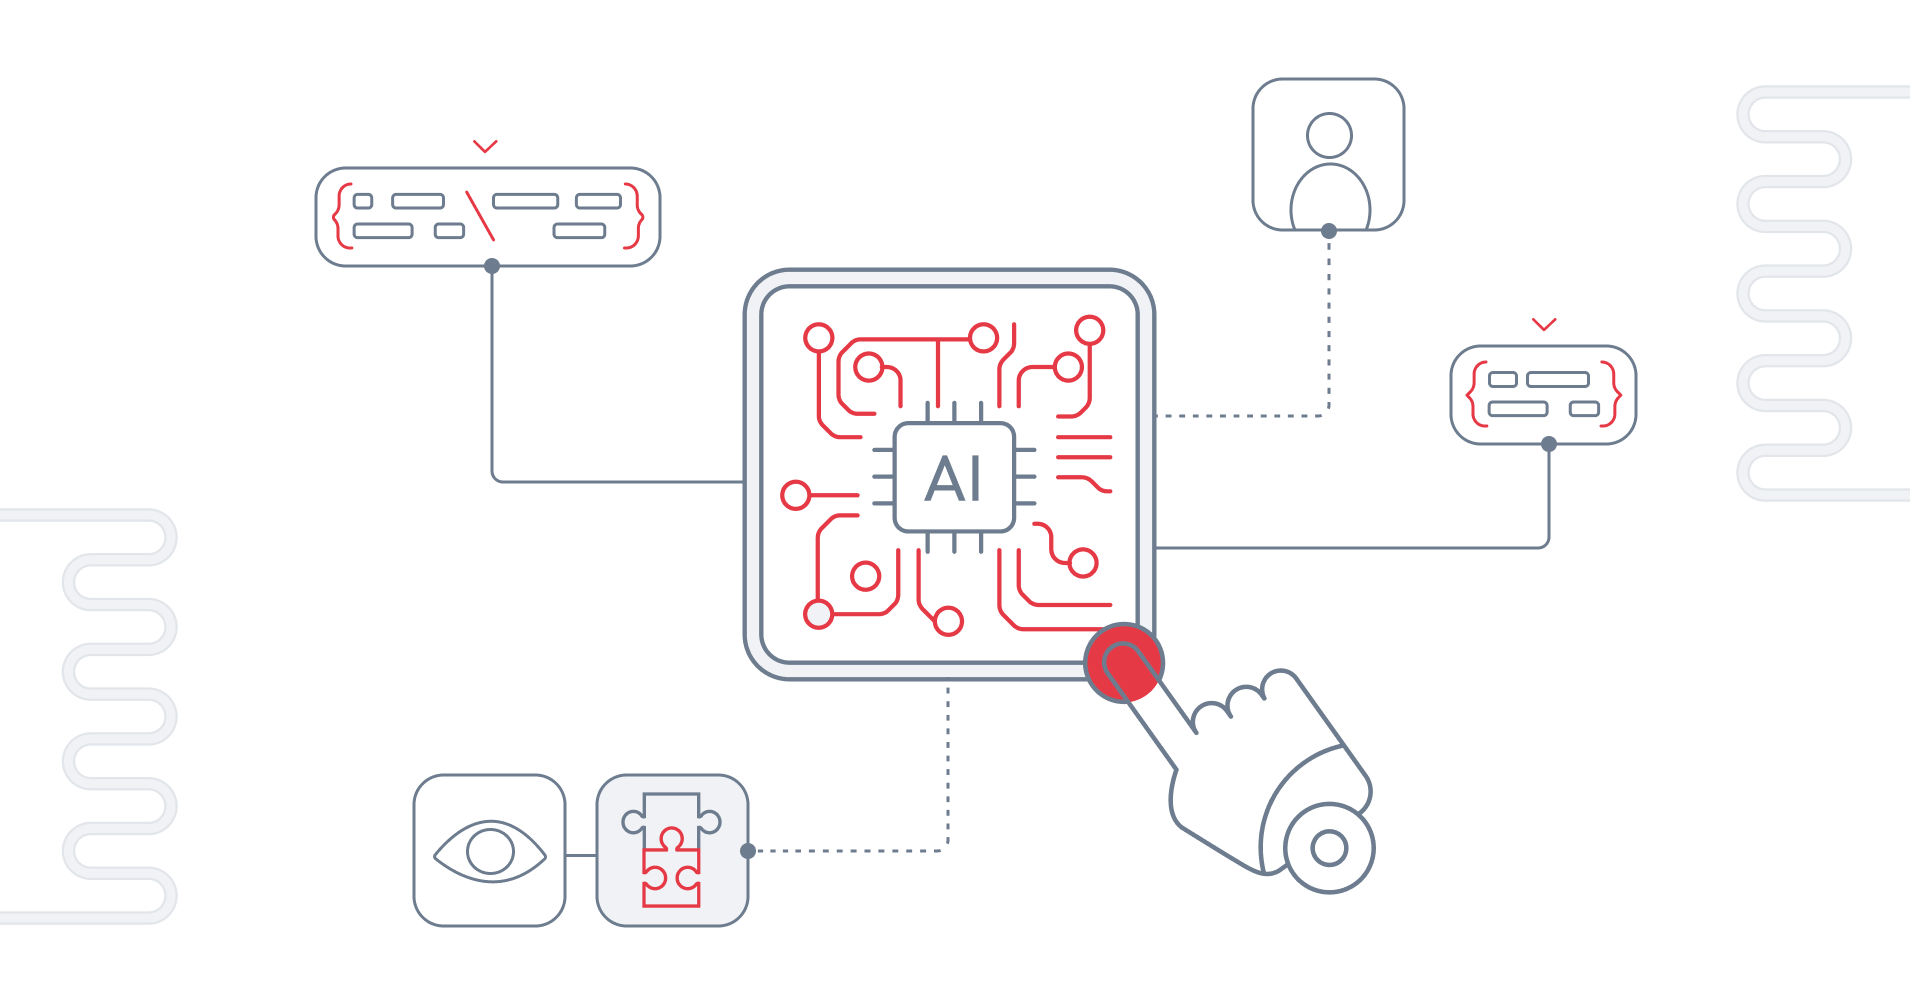 Conceptual graphic showcasing ethical AI practices and ESG standards, featuring AI circuit connections and human interactions.